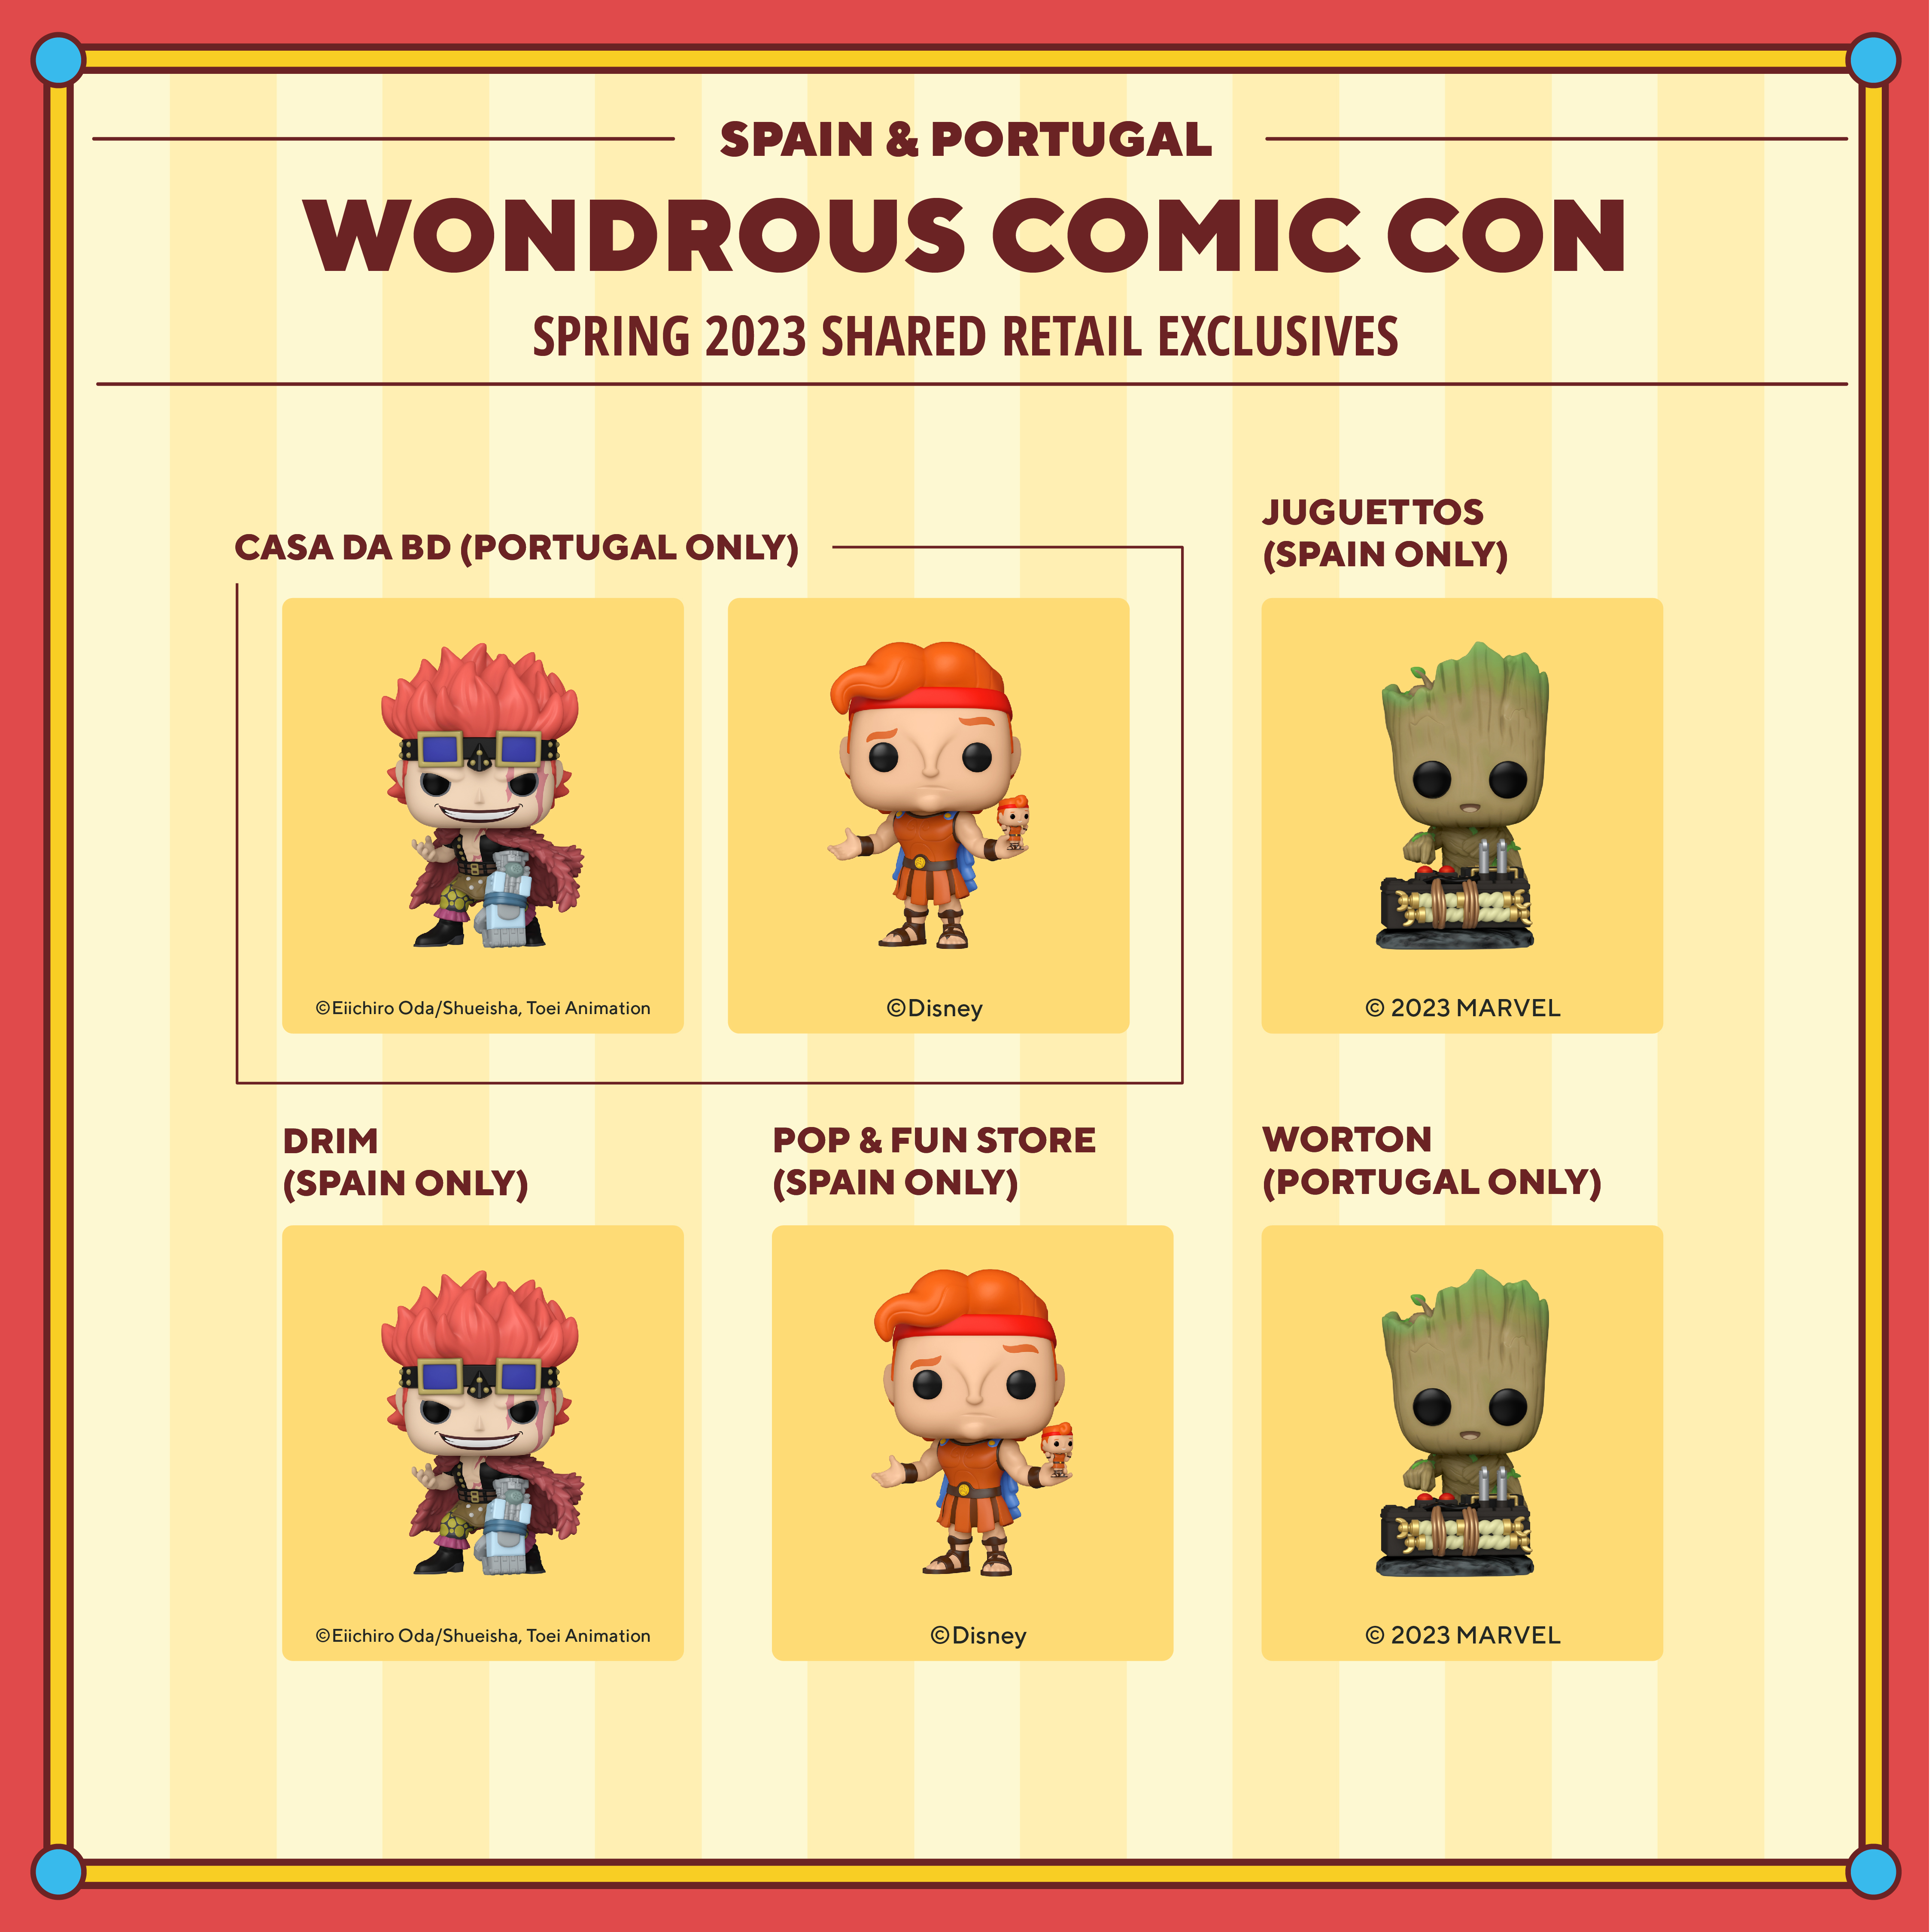 2023 WonderCon Spain & Portugal Spring shared retail exclusives. Casa Da BD (Portugal only) exclusives include: Pop! Eustass Kid and Pop! Hercules with Action Figure. Juguettos (Spain only) exclusives include: Pop! Baby Groot with Detonator. Drim (Spain only) exclusives include Pop! Eustass Kid. Pop & Fun Store (Spain only) exclusives include Pop! Hercules with Action Figure. Worton (Portugal only) exclusives include Pop! Baby Groot with Detonator.